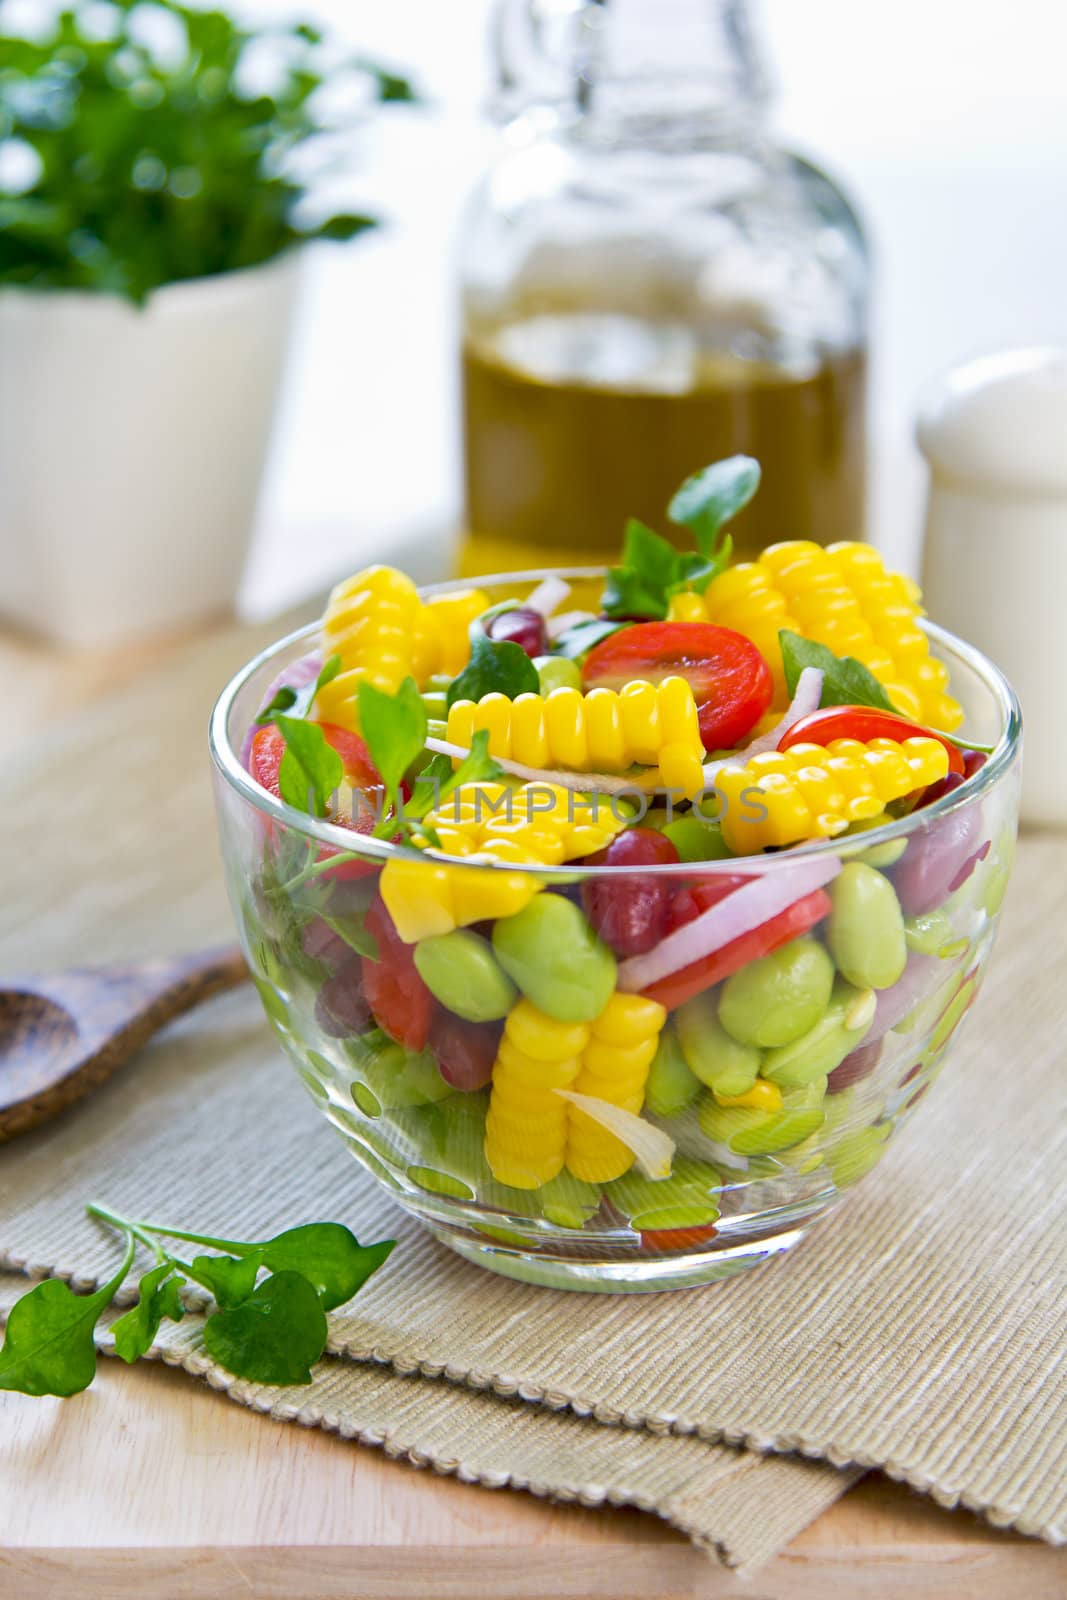 Varieties of Beans, sweet corn and tomato  salad